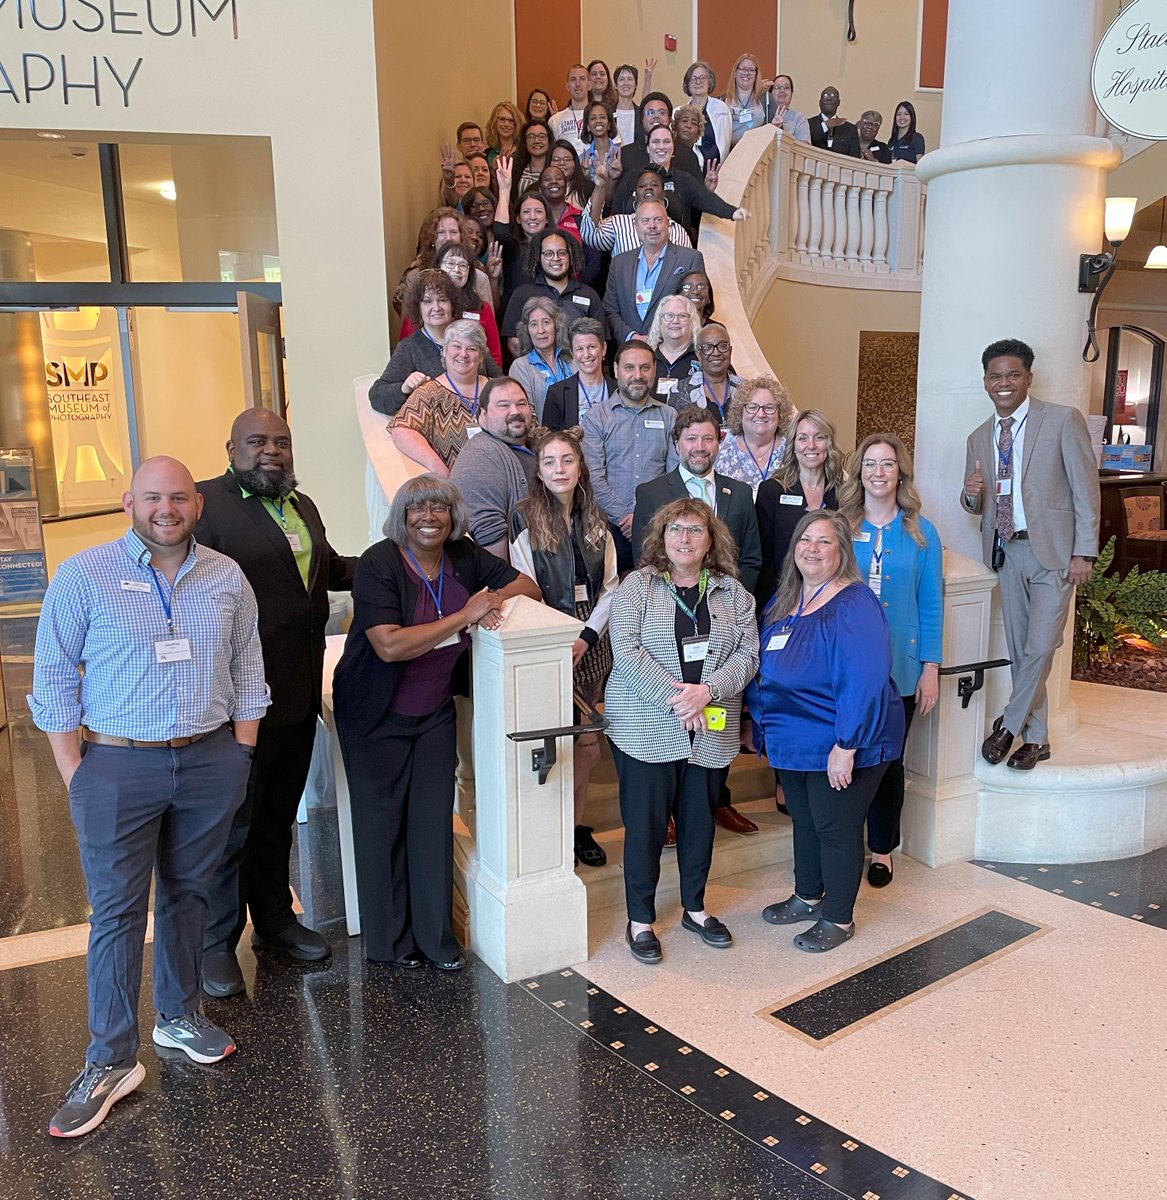 A great AFC Region 3 conference last week at Daytona State College. Great people make for a great event!
#AUMiStrong #AFC2024 #BuildingRelationships #AFCRegion3
5GPowerSkills.com